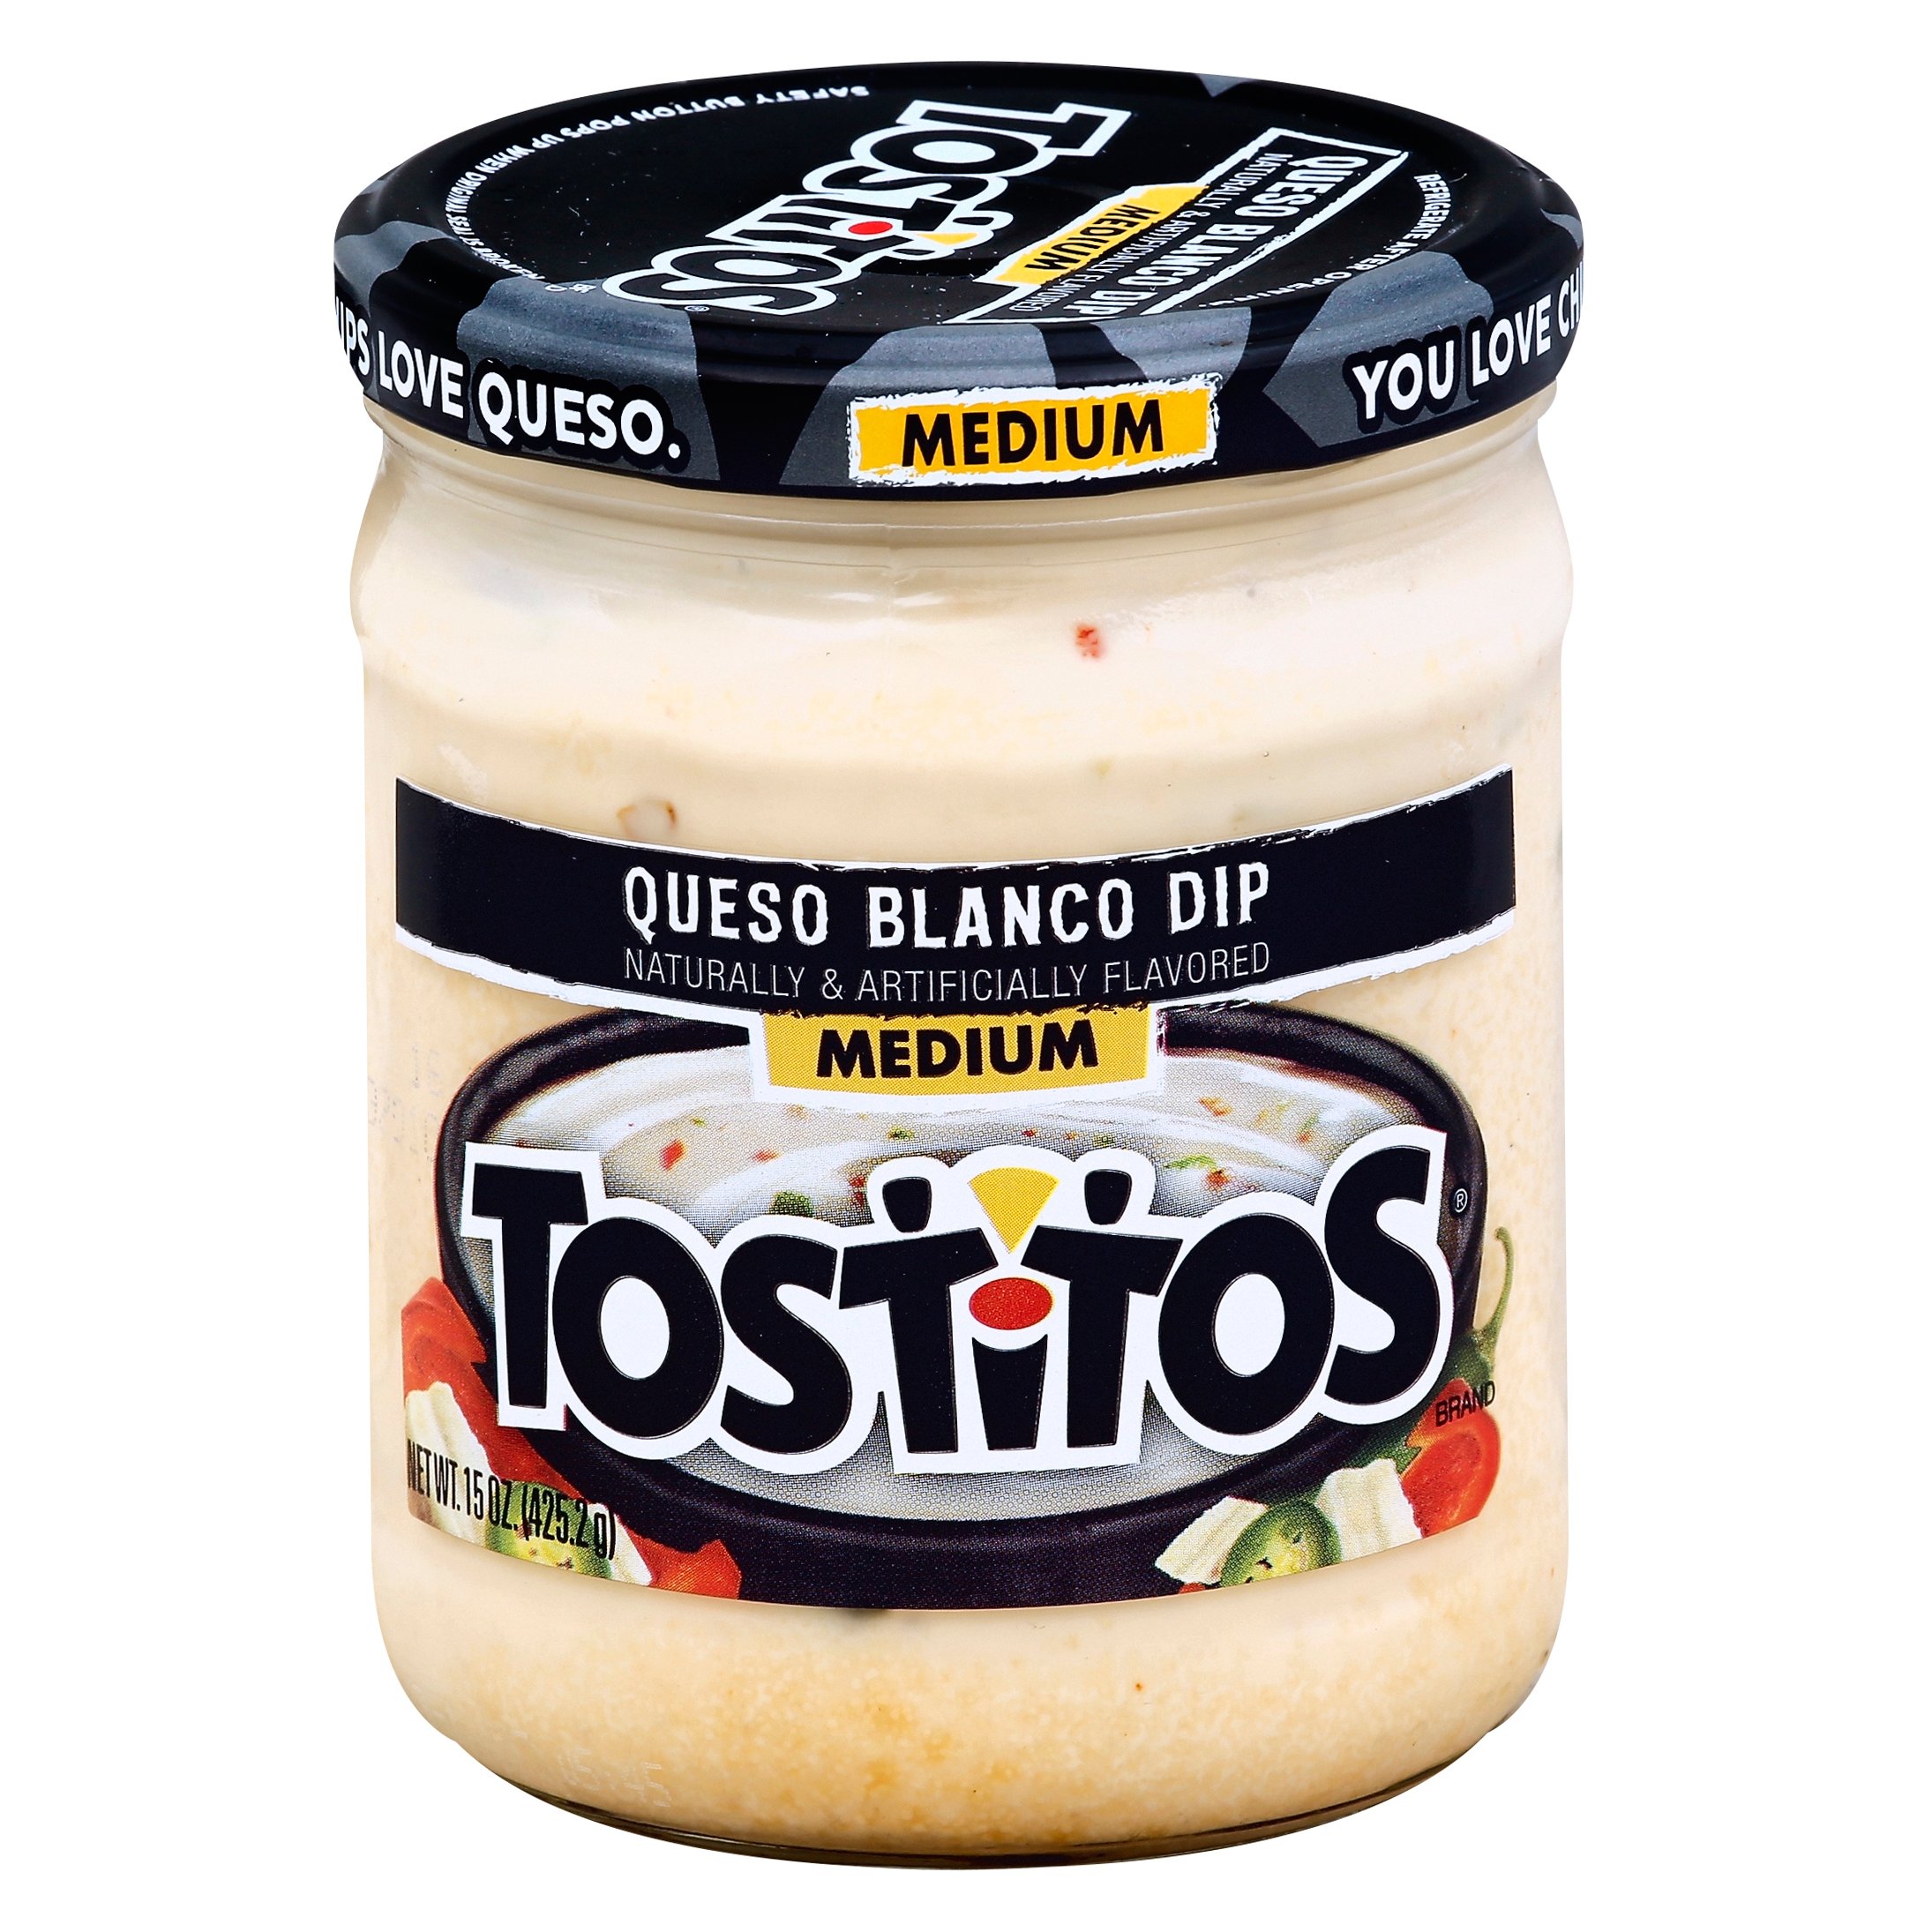 Tostitos Medium Queso Blanco Dip - Shop Salsa & Dip at H-E-B Does Tostitos Queso Need To Be Refrigerated